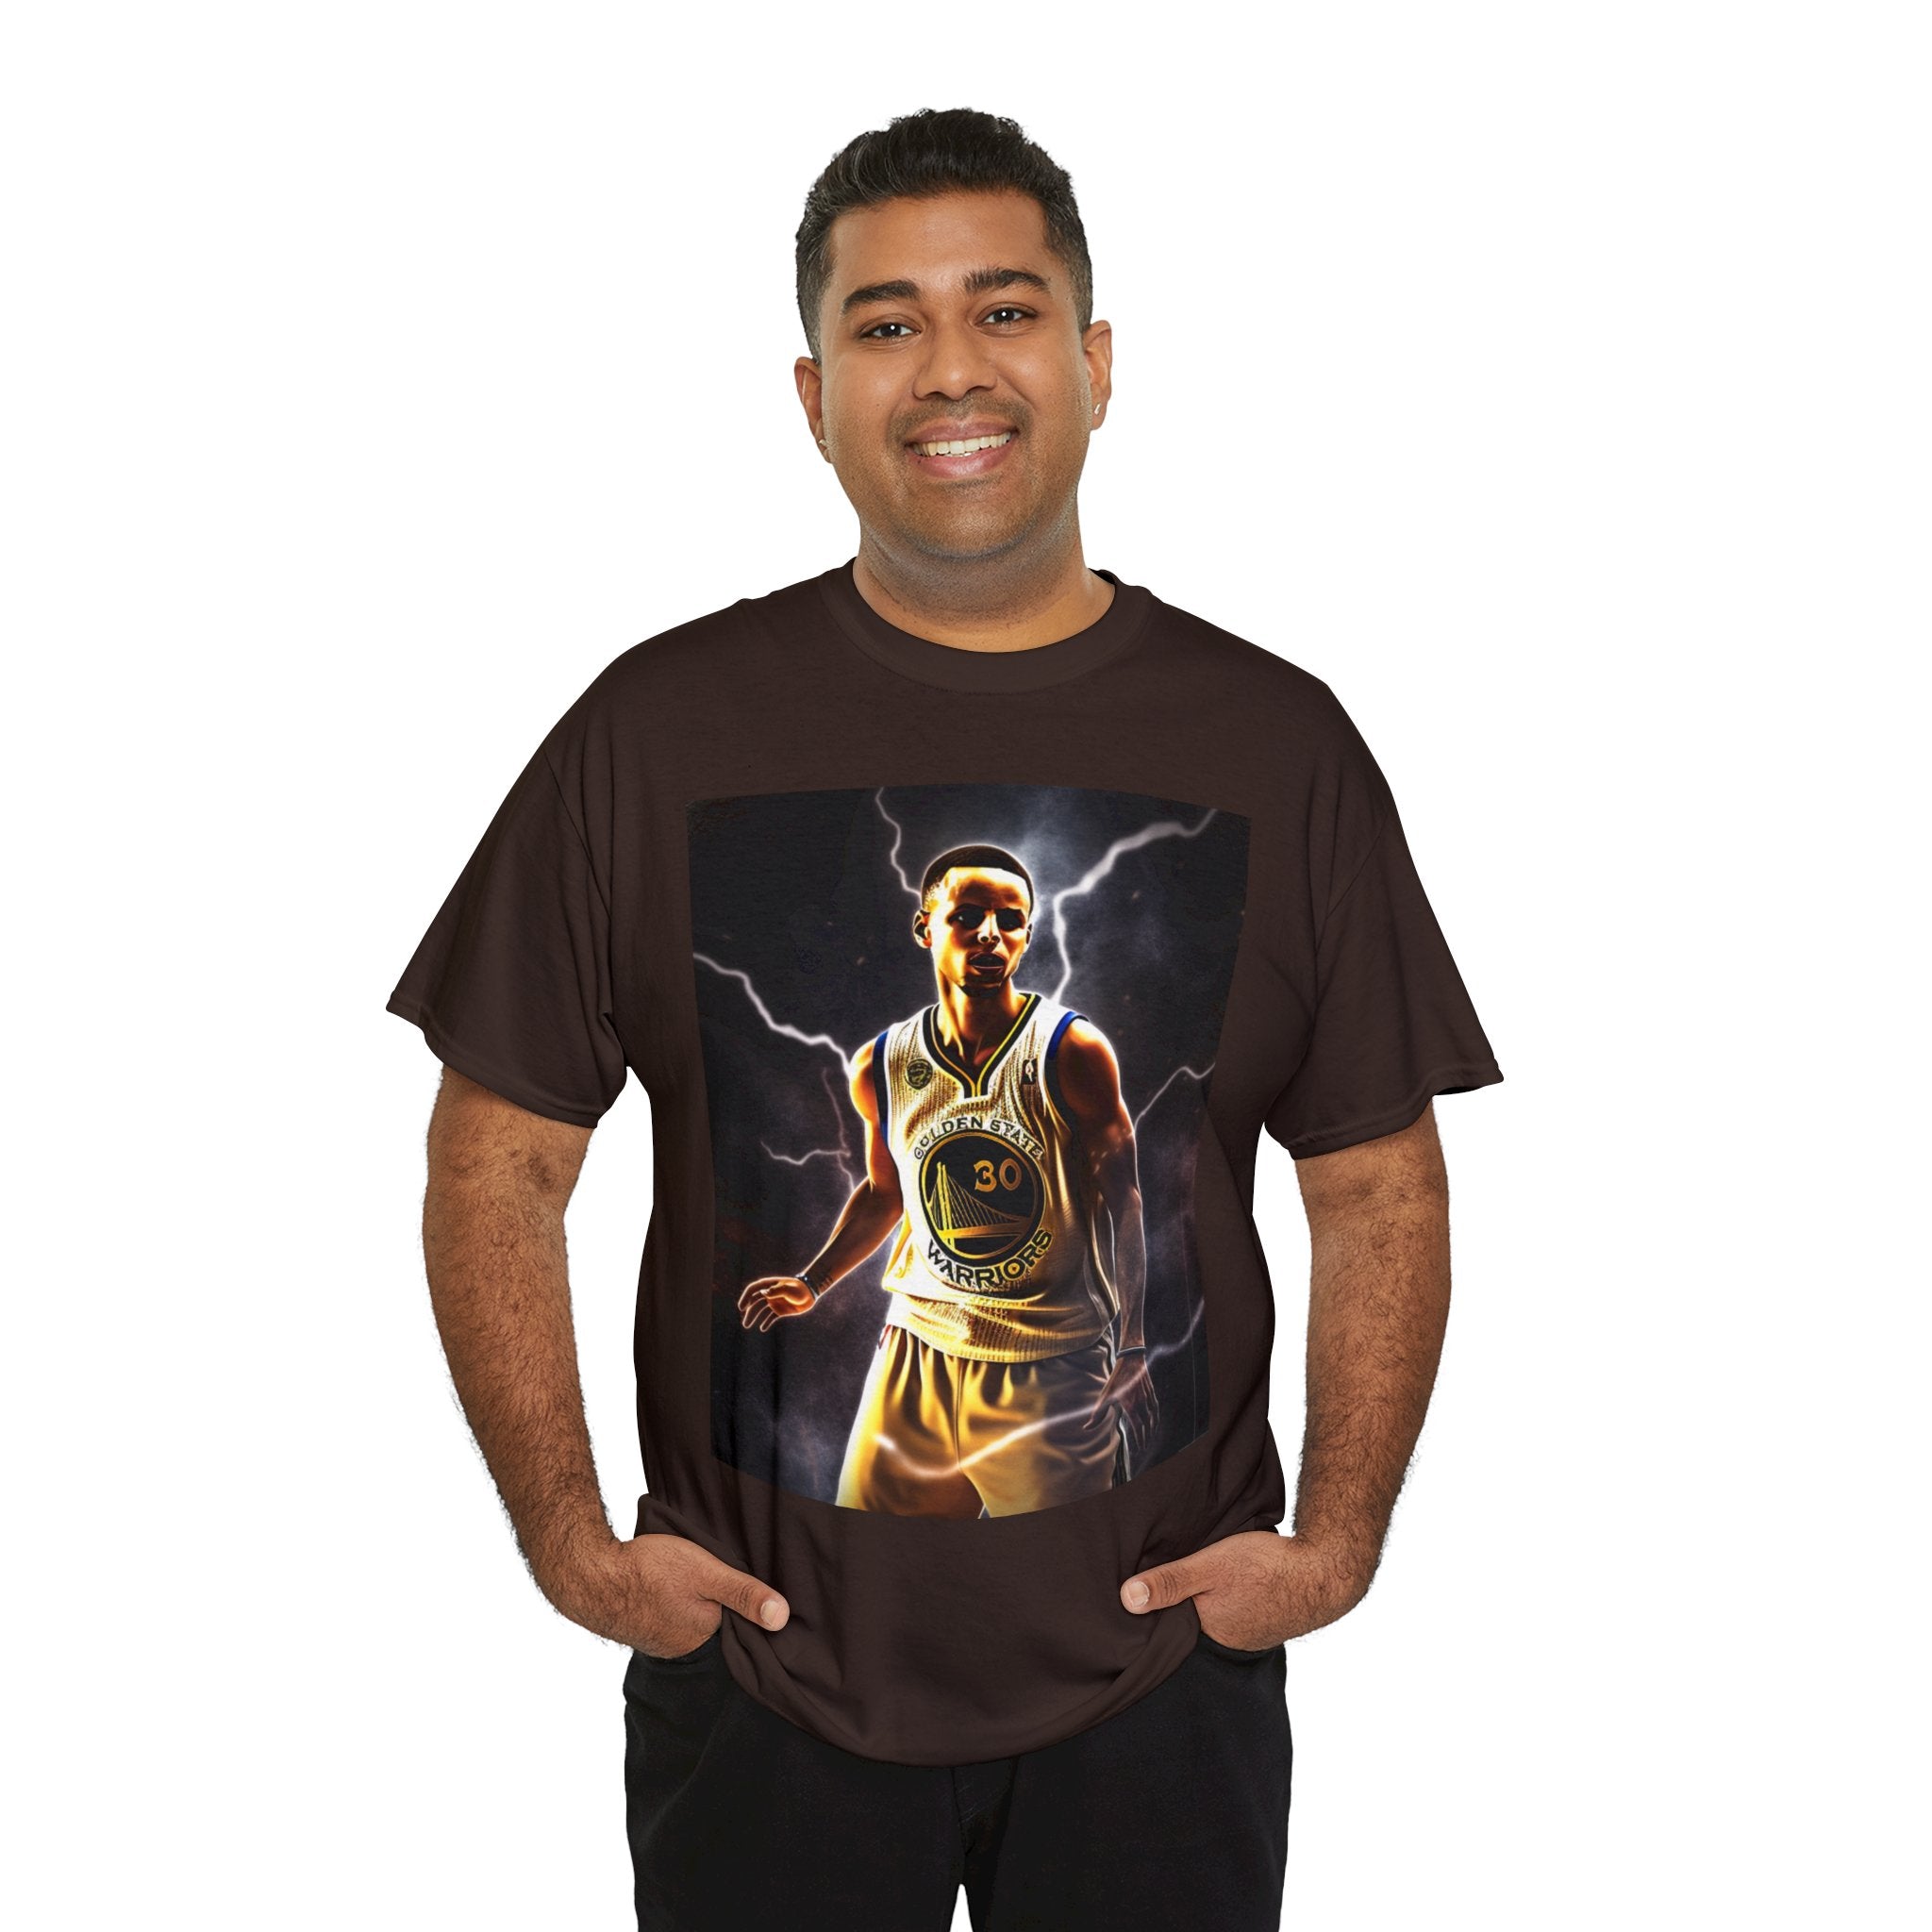 This image features a high-quality, heavy cotton unisex t-shirt in a classic cut. The design prominently displays an artistic representation of a 3-point shot, inspired by Steph Curry's iconic playing style, set against a background that hints at the dynamism and energy of basketball.